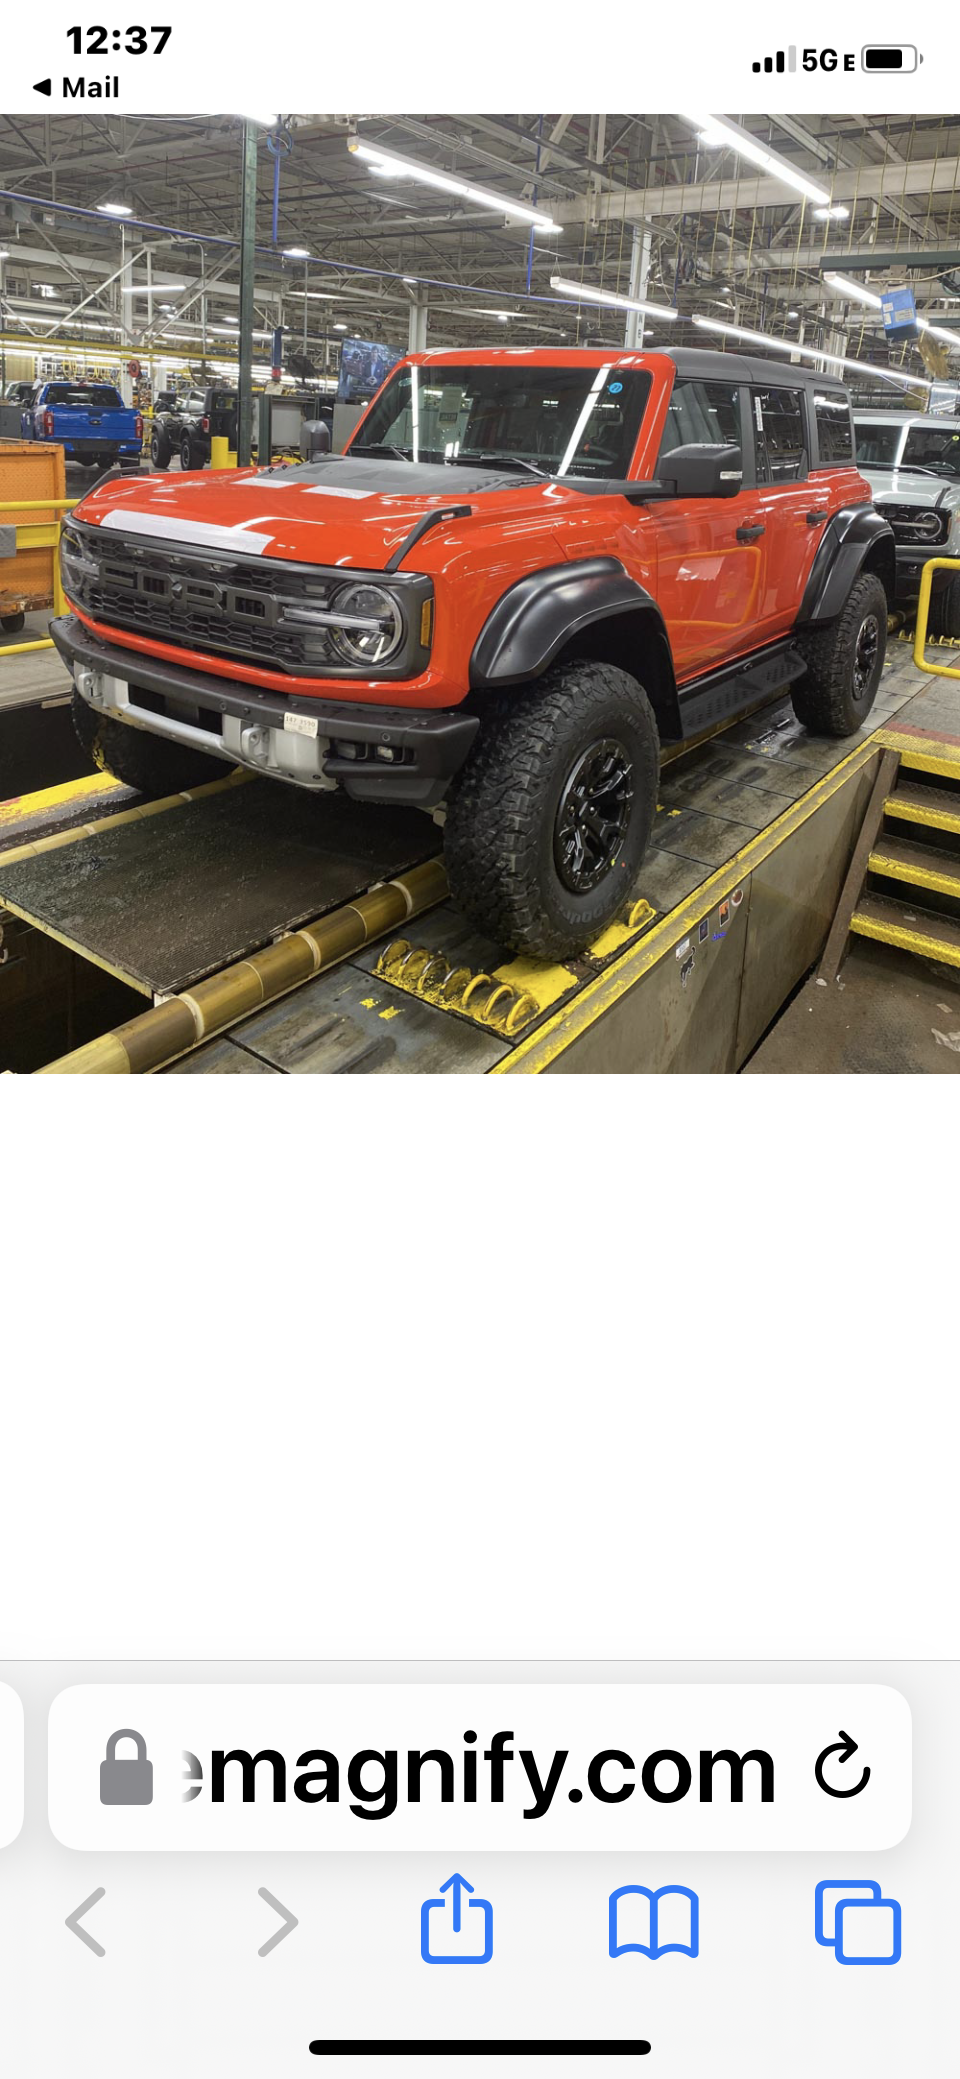 Ford Bronco ⏳ Bronco Raptor now being scheduled for production & VIN assigned D3FD5FCD-4FDB-40F2-9D9D-0907C0552A3B